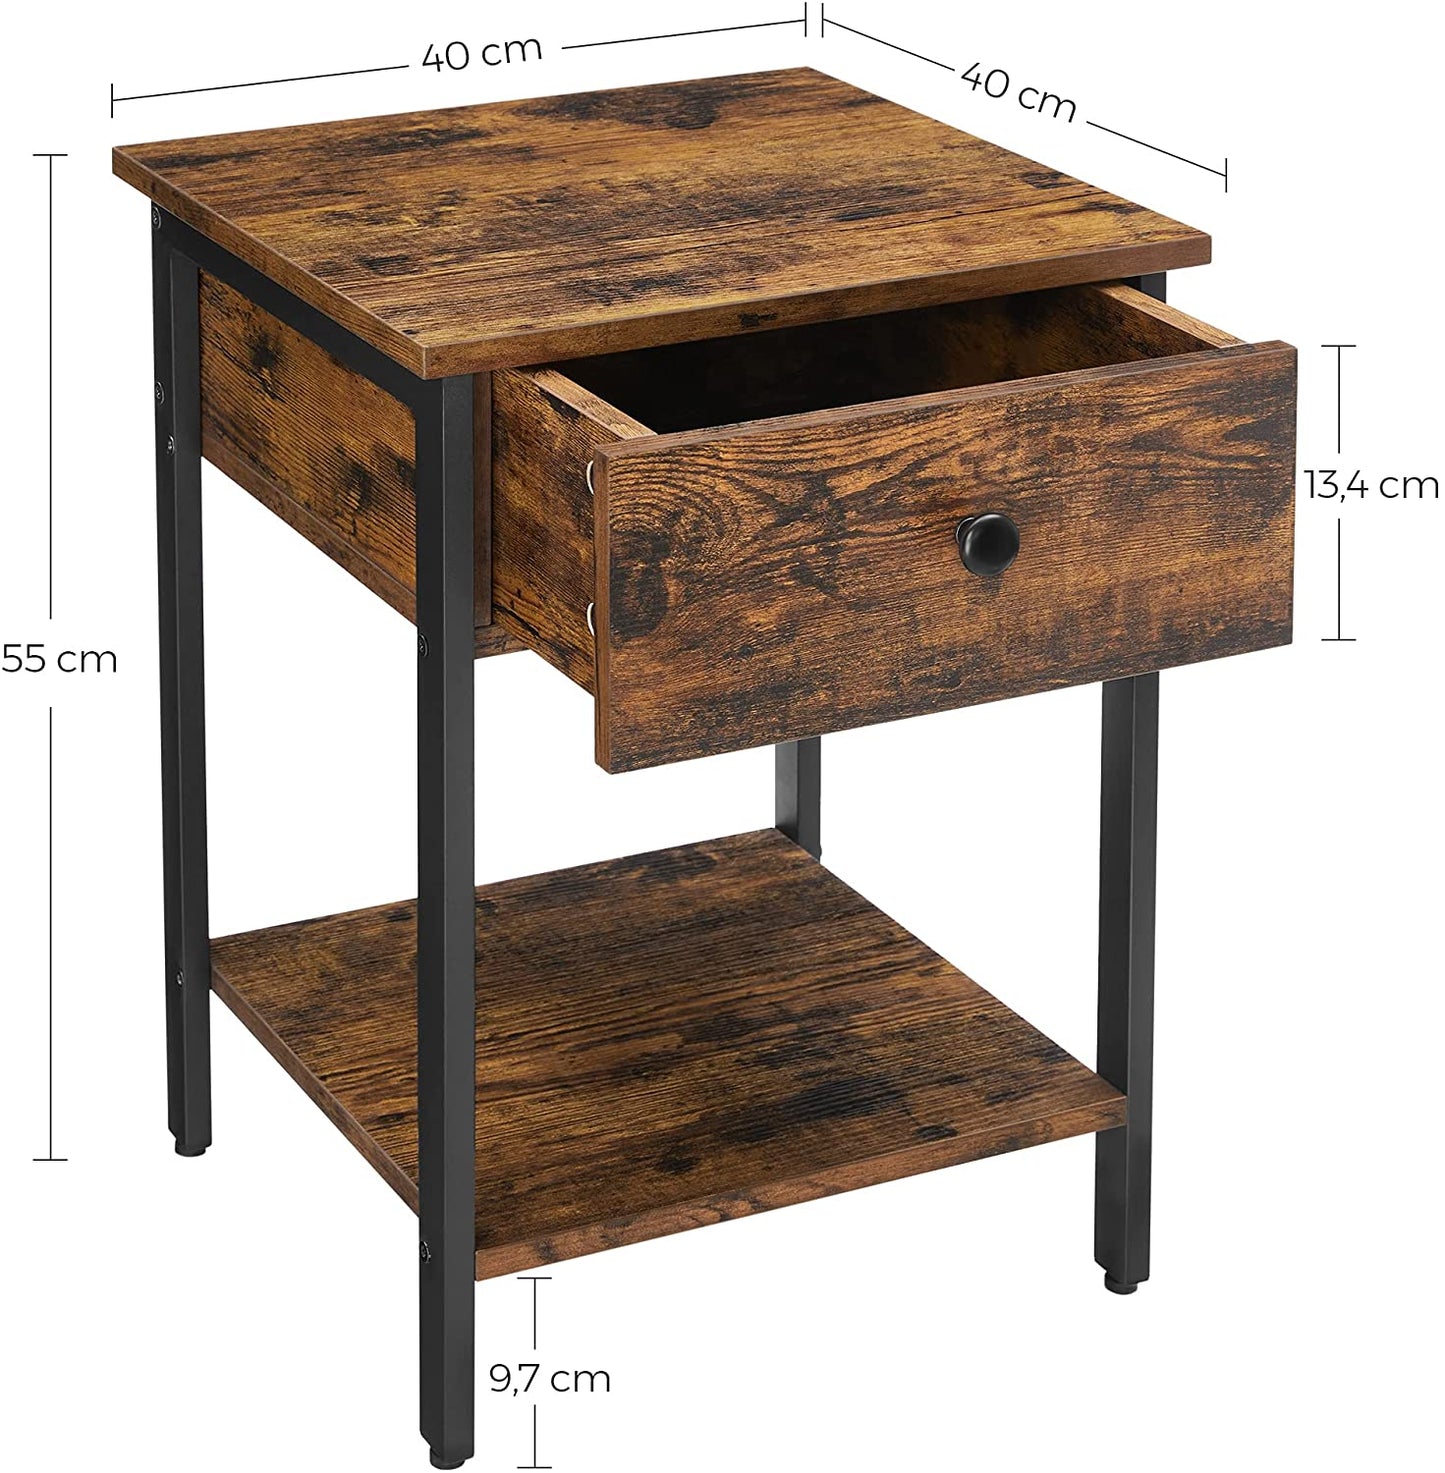 Lifespace Industrial Rustic Wood Side Table with Draw - Lifespace